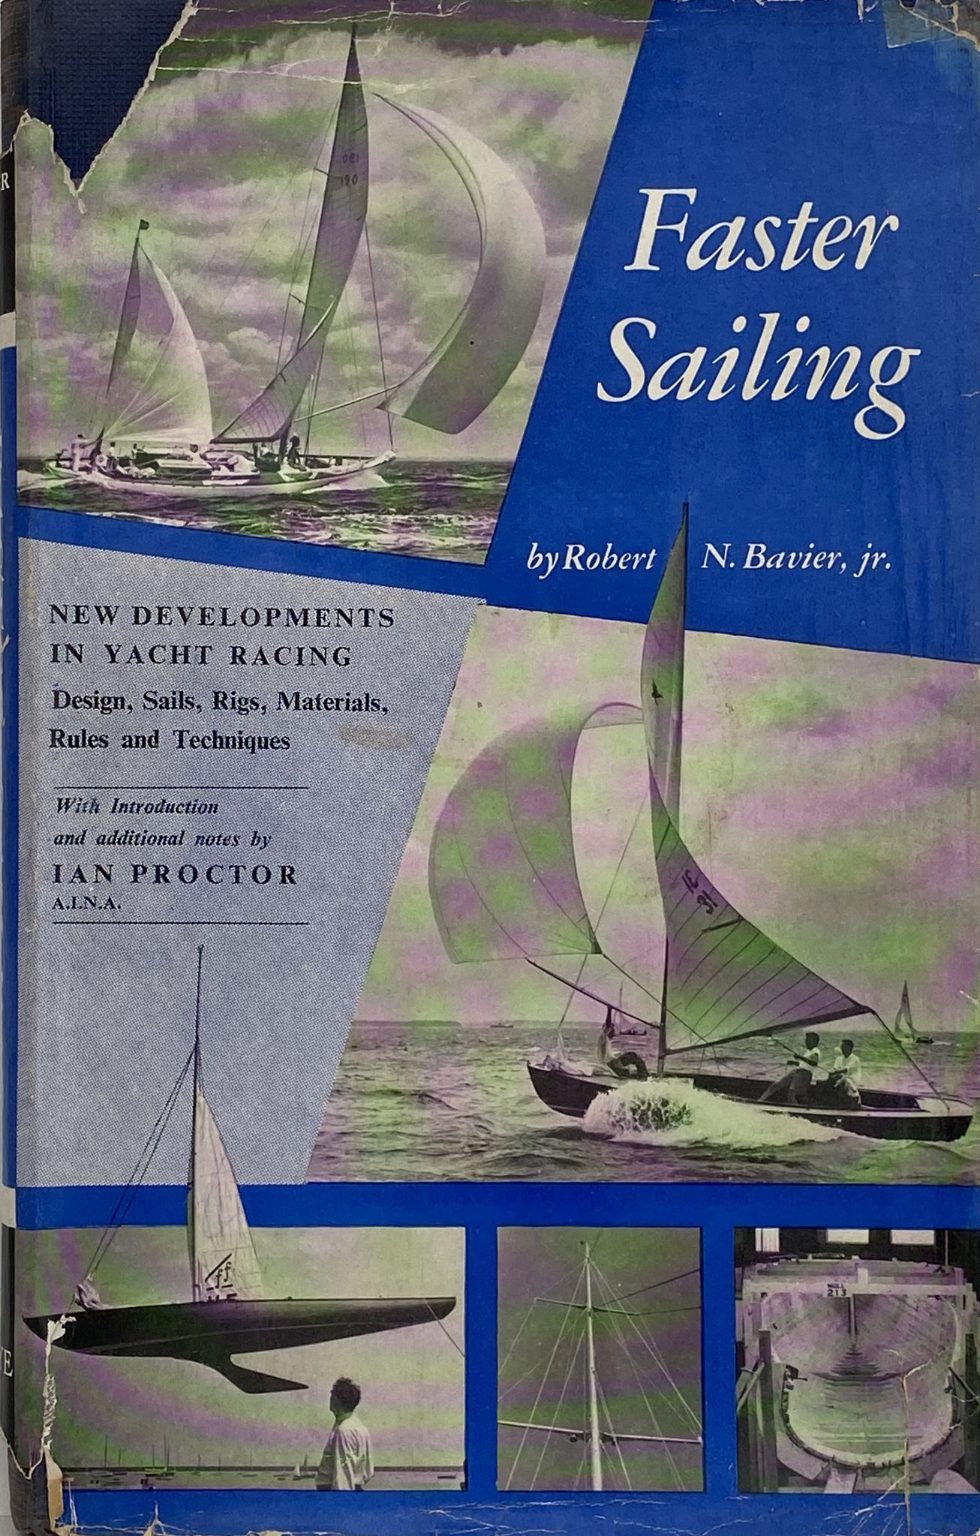 FASTER SAILING: New Developments in Yacht Racing